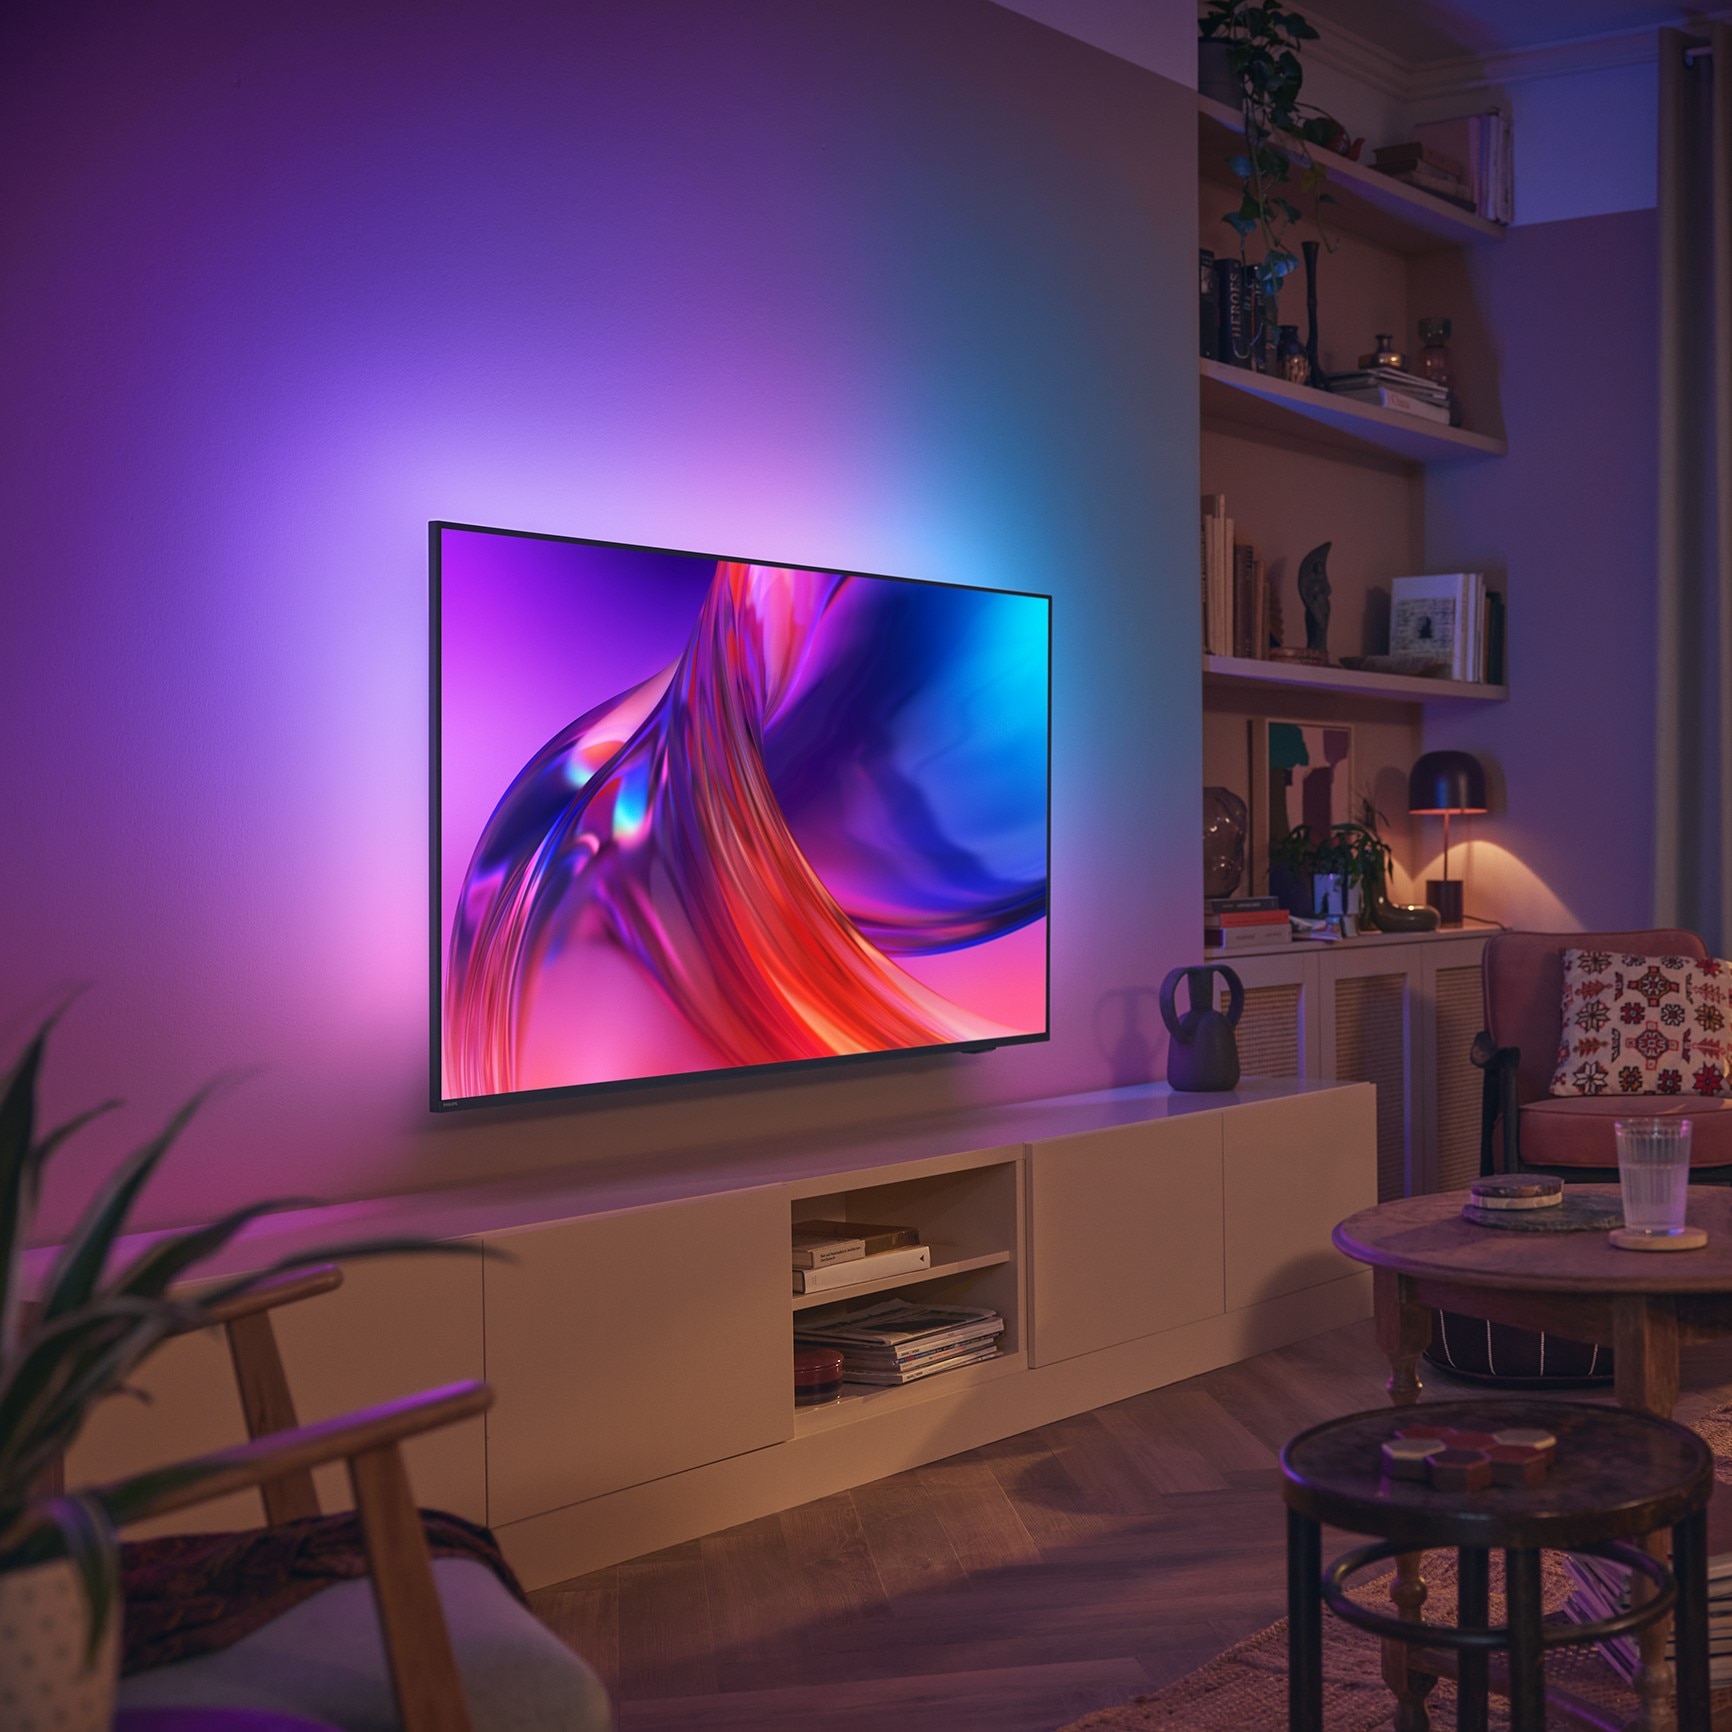 Philips 65 The One Ambilight 4K TV - 65PUS8518